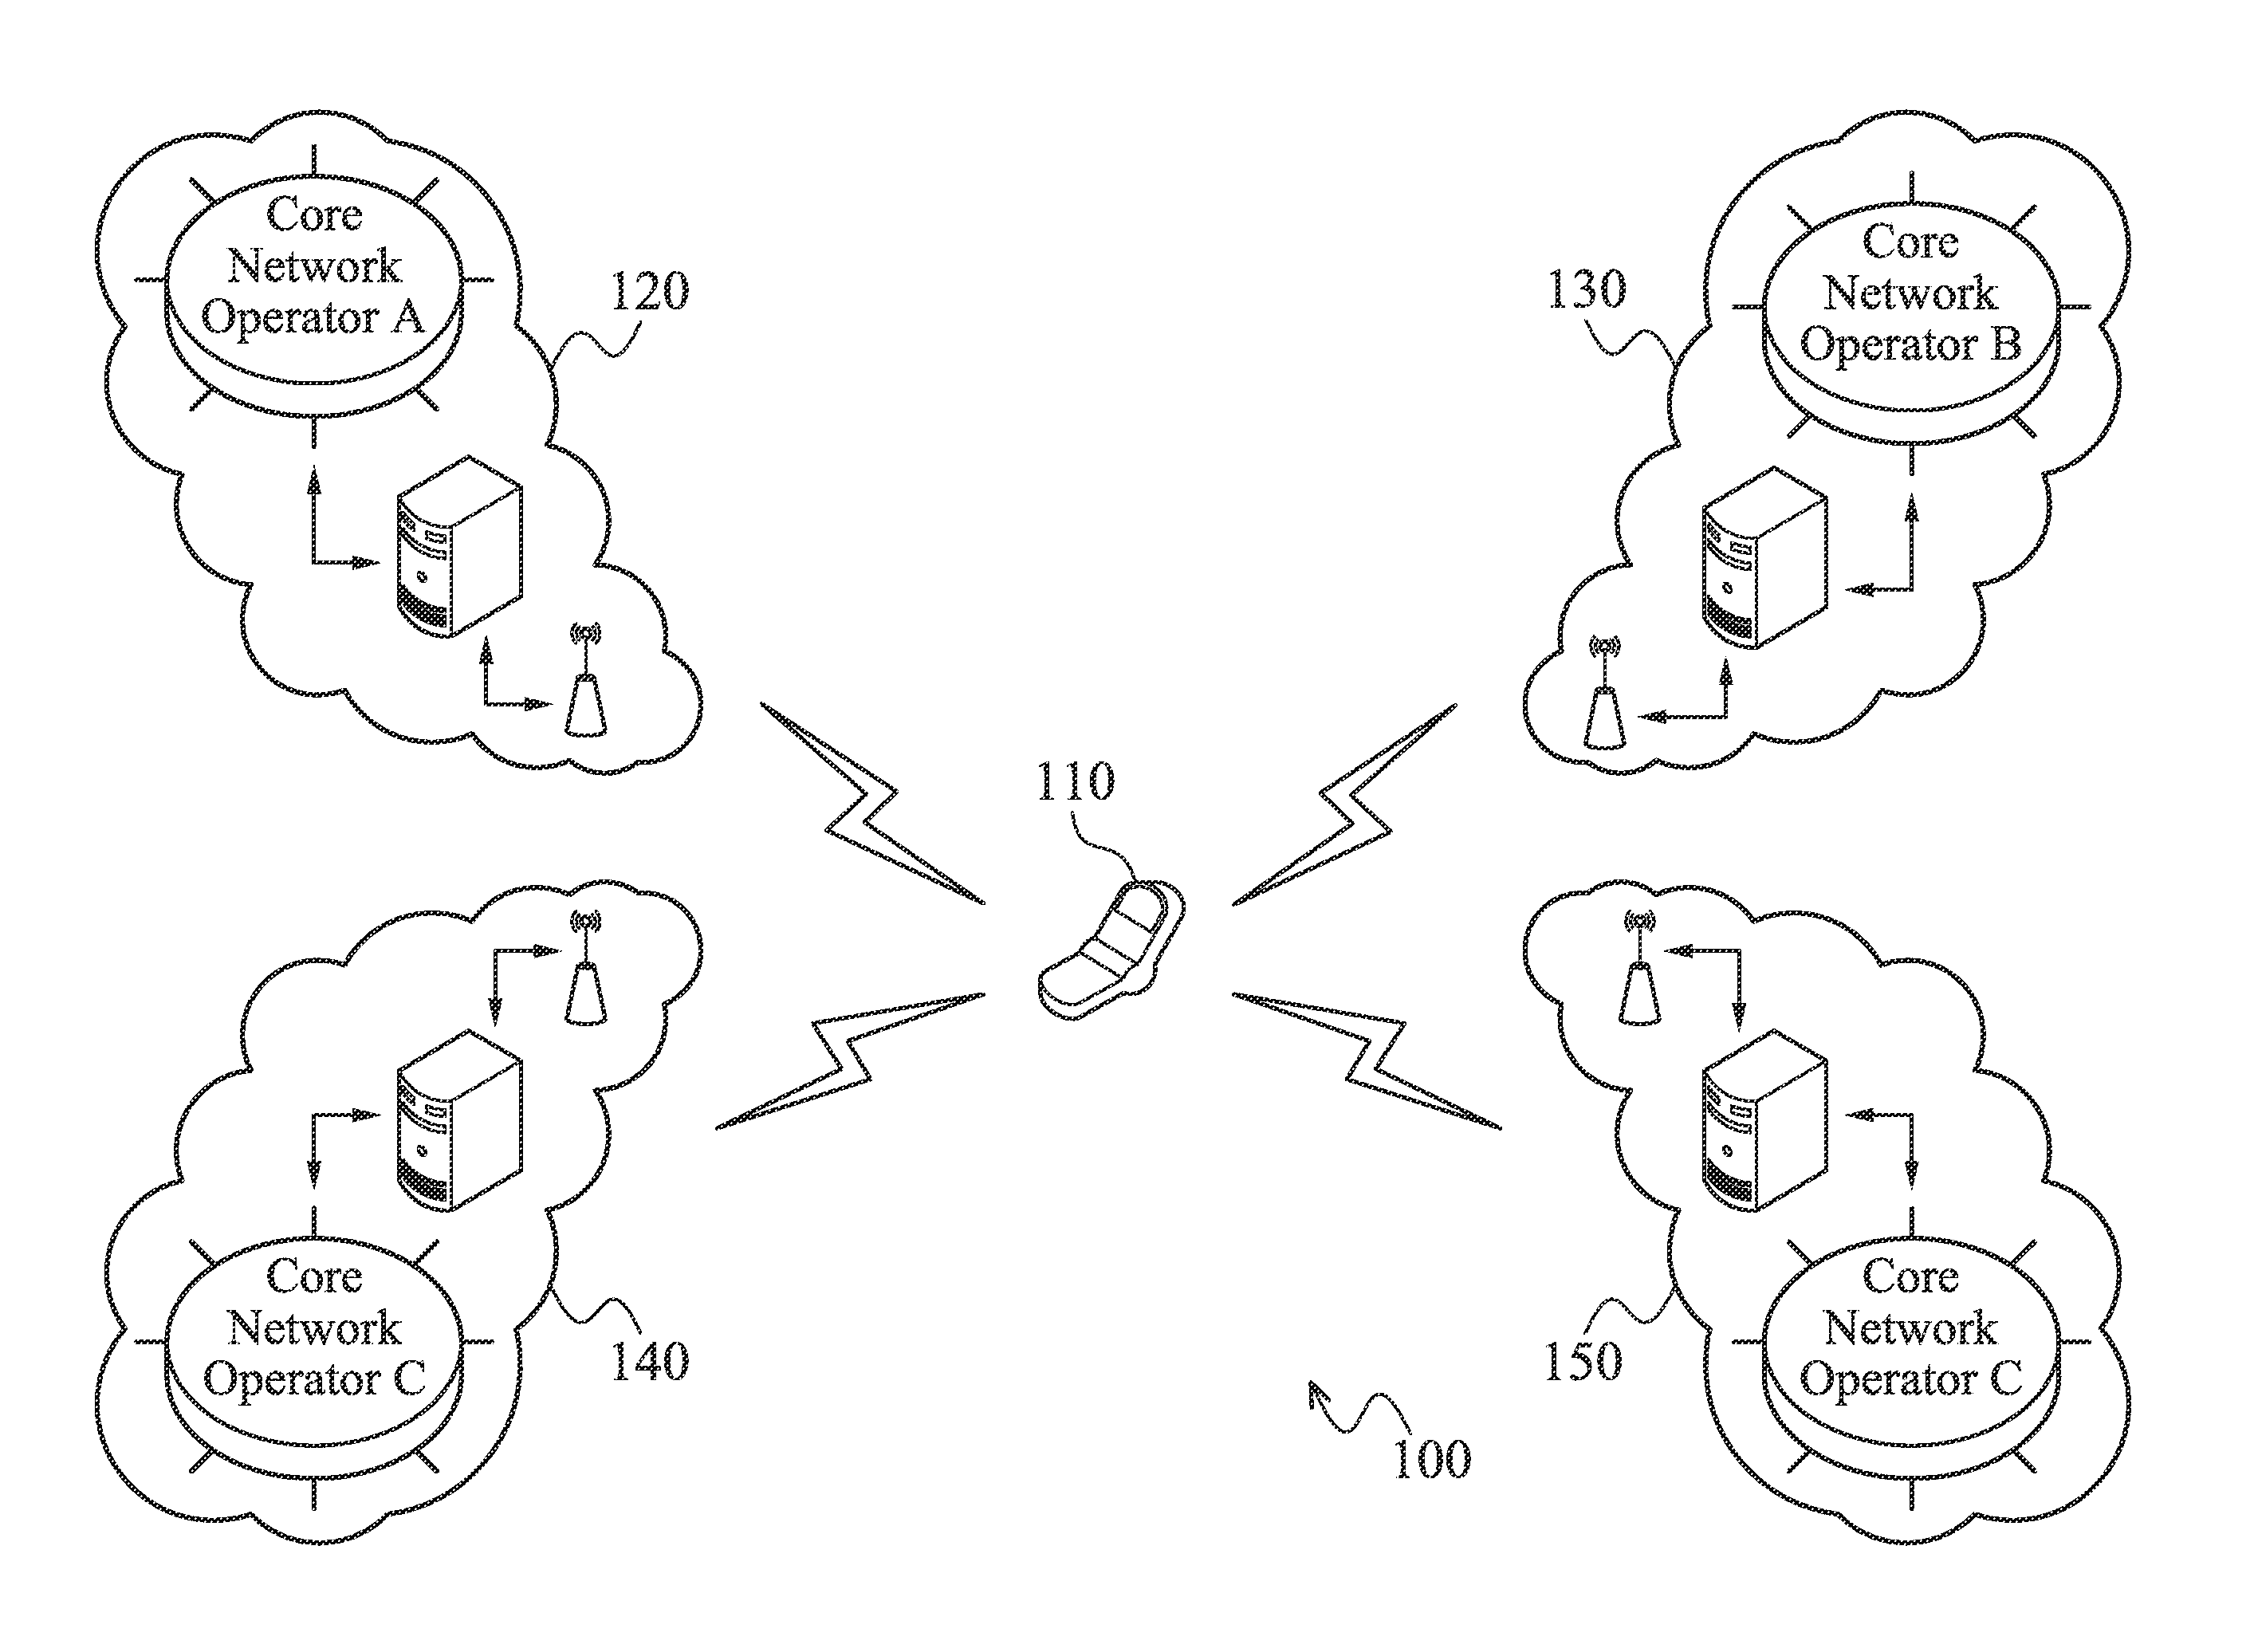 Apparatuses and methods for enhancing data rate for packet-switched (PS) data service